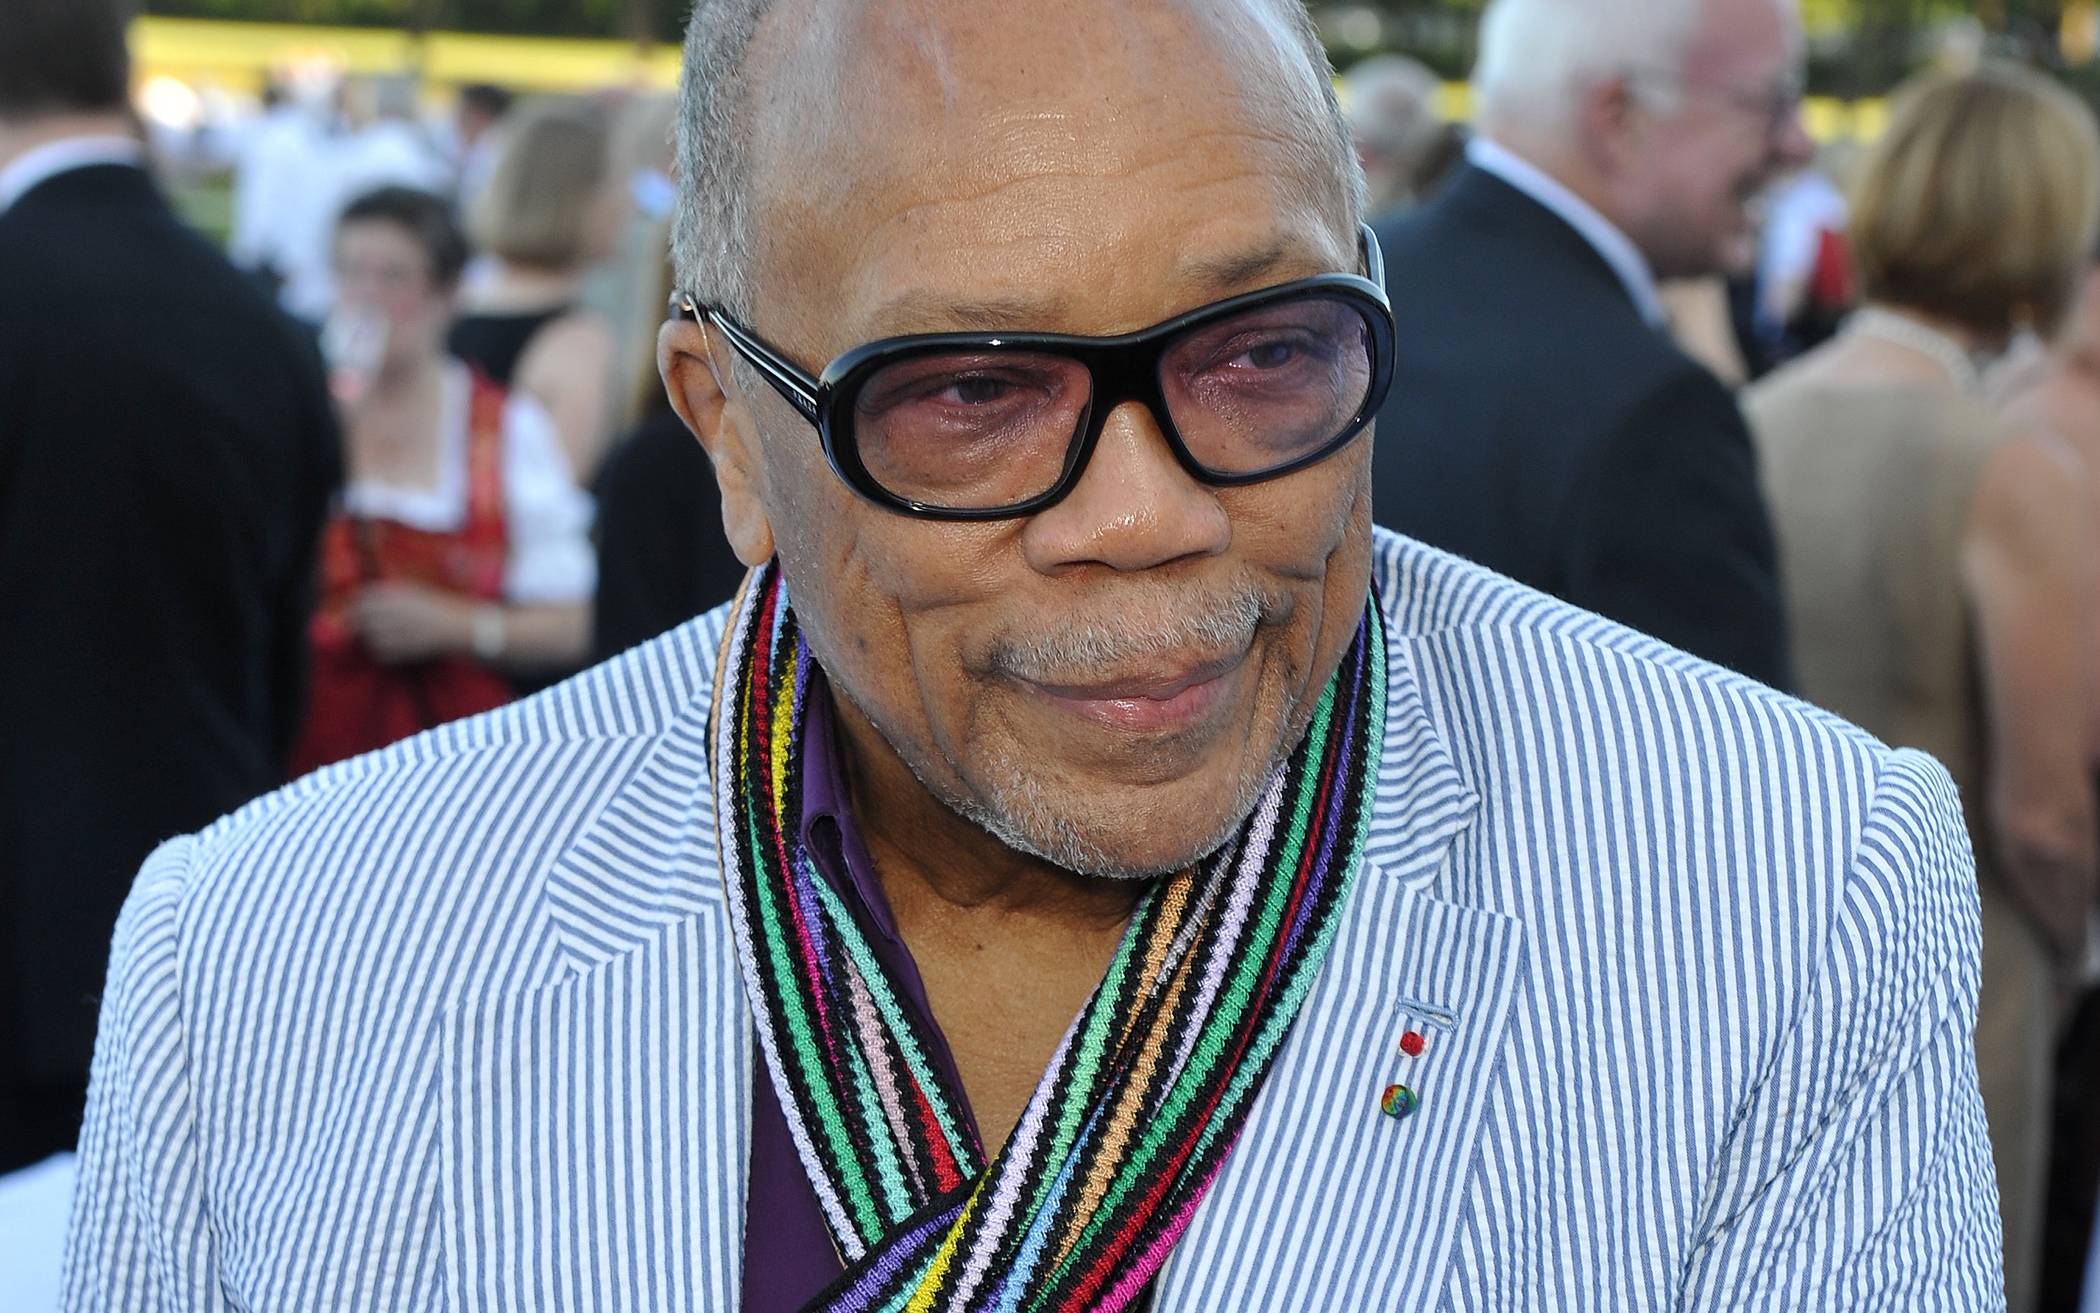 Quincy Jones Net Worth - The Legendary Musician And Producer Wealth